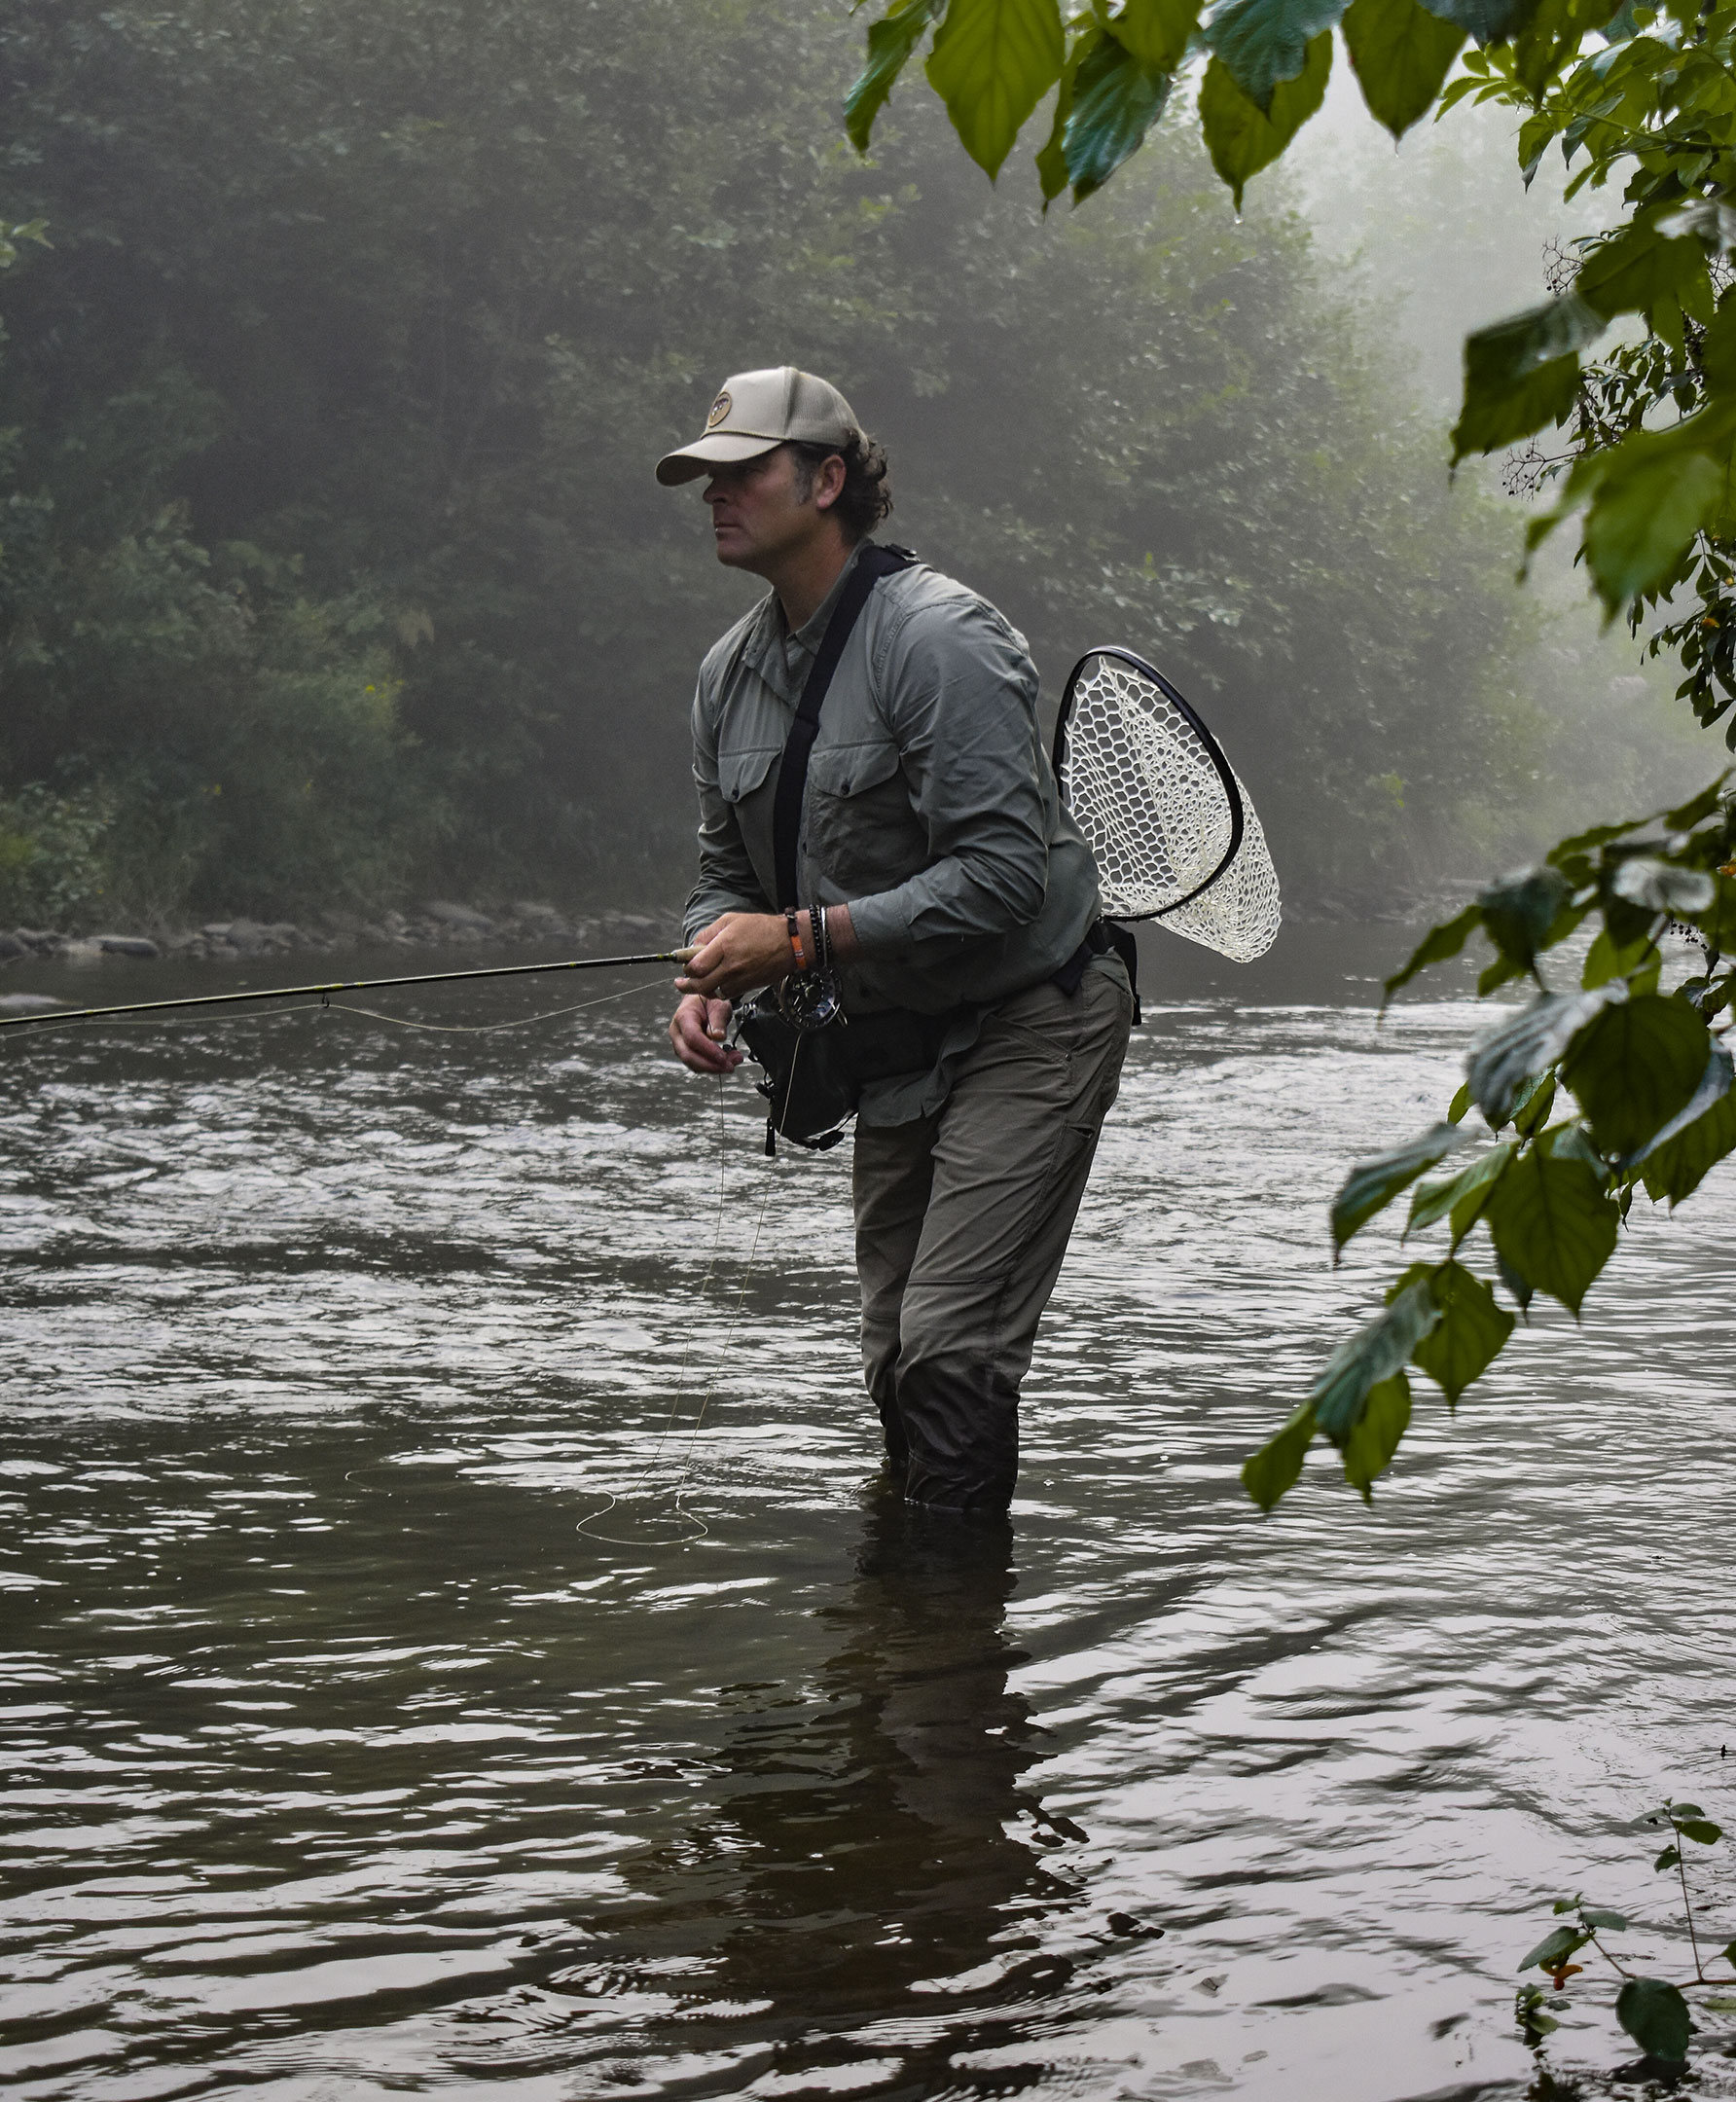 WNC Fly Fishing – The Future is Downstream